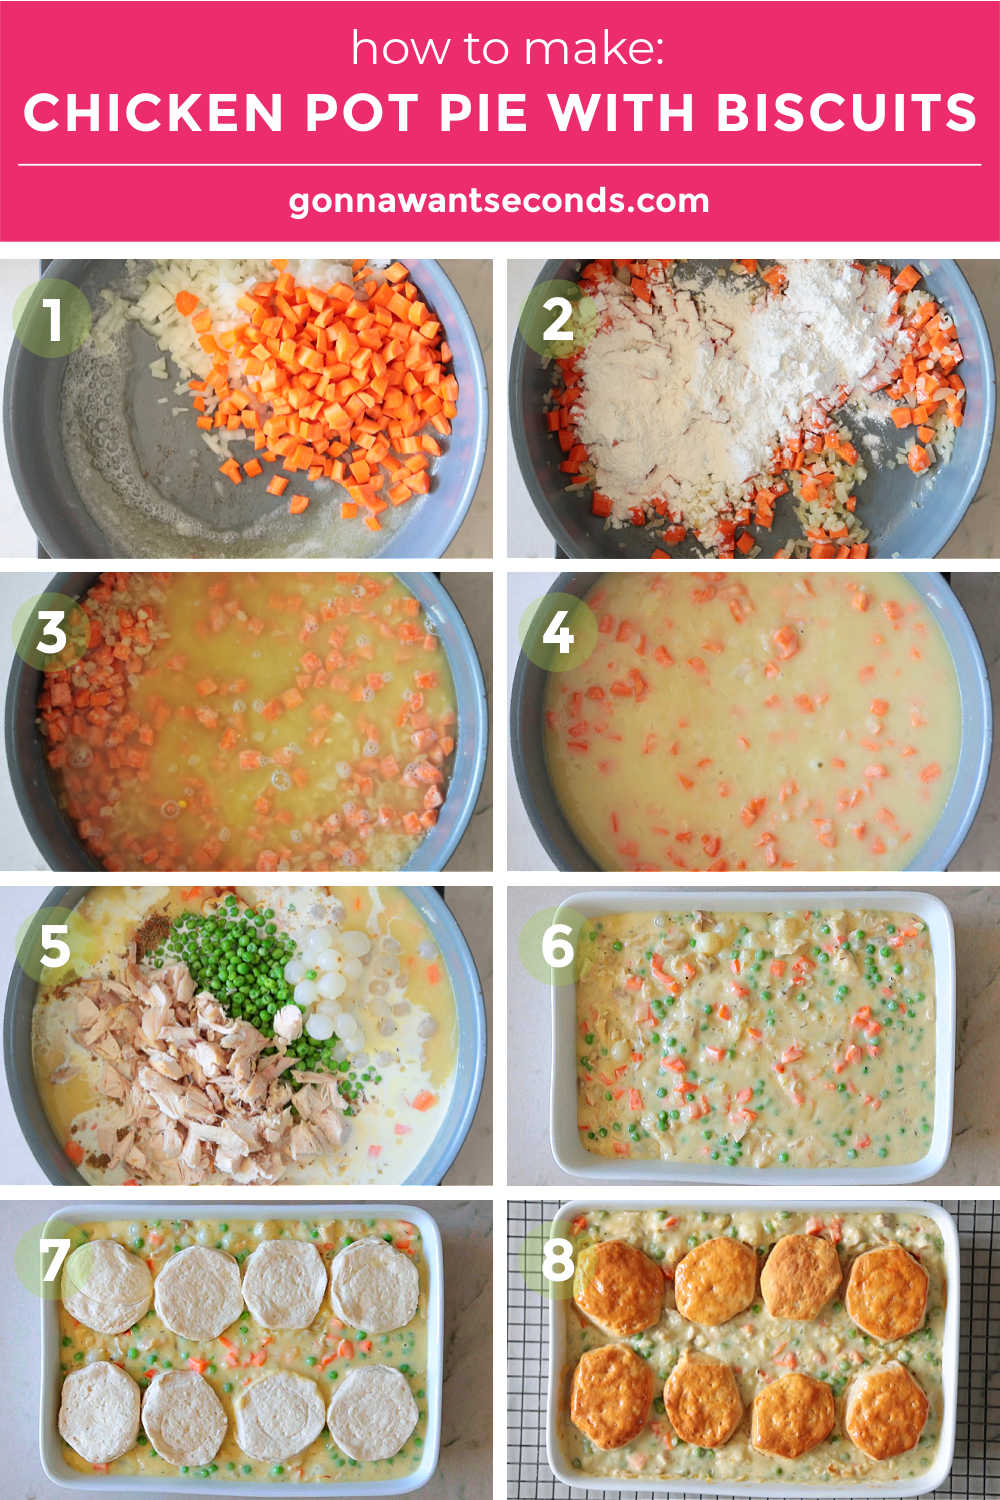 Step by step how to make chicken pot pie with biscuits